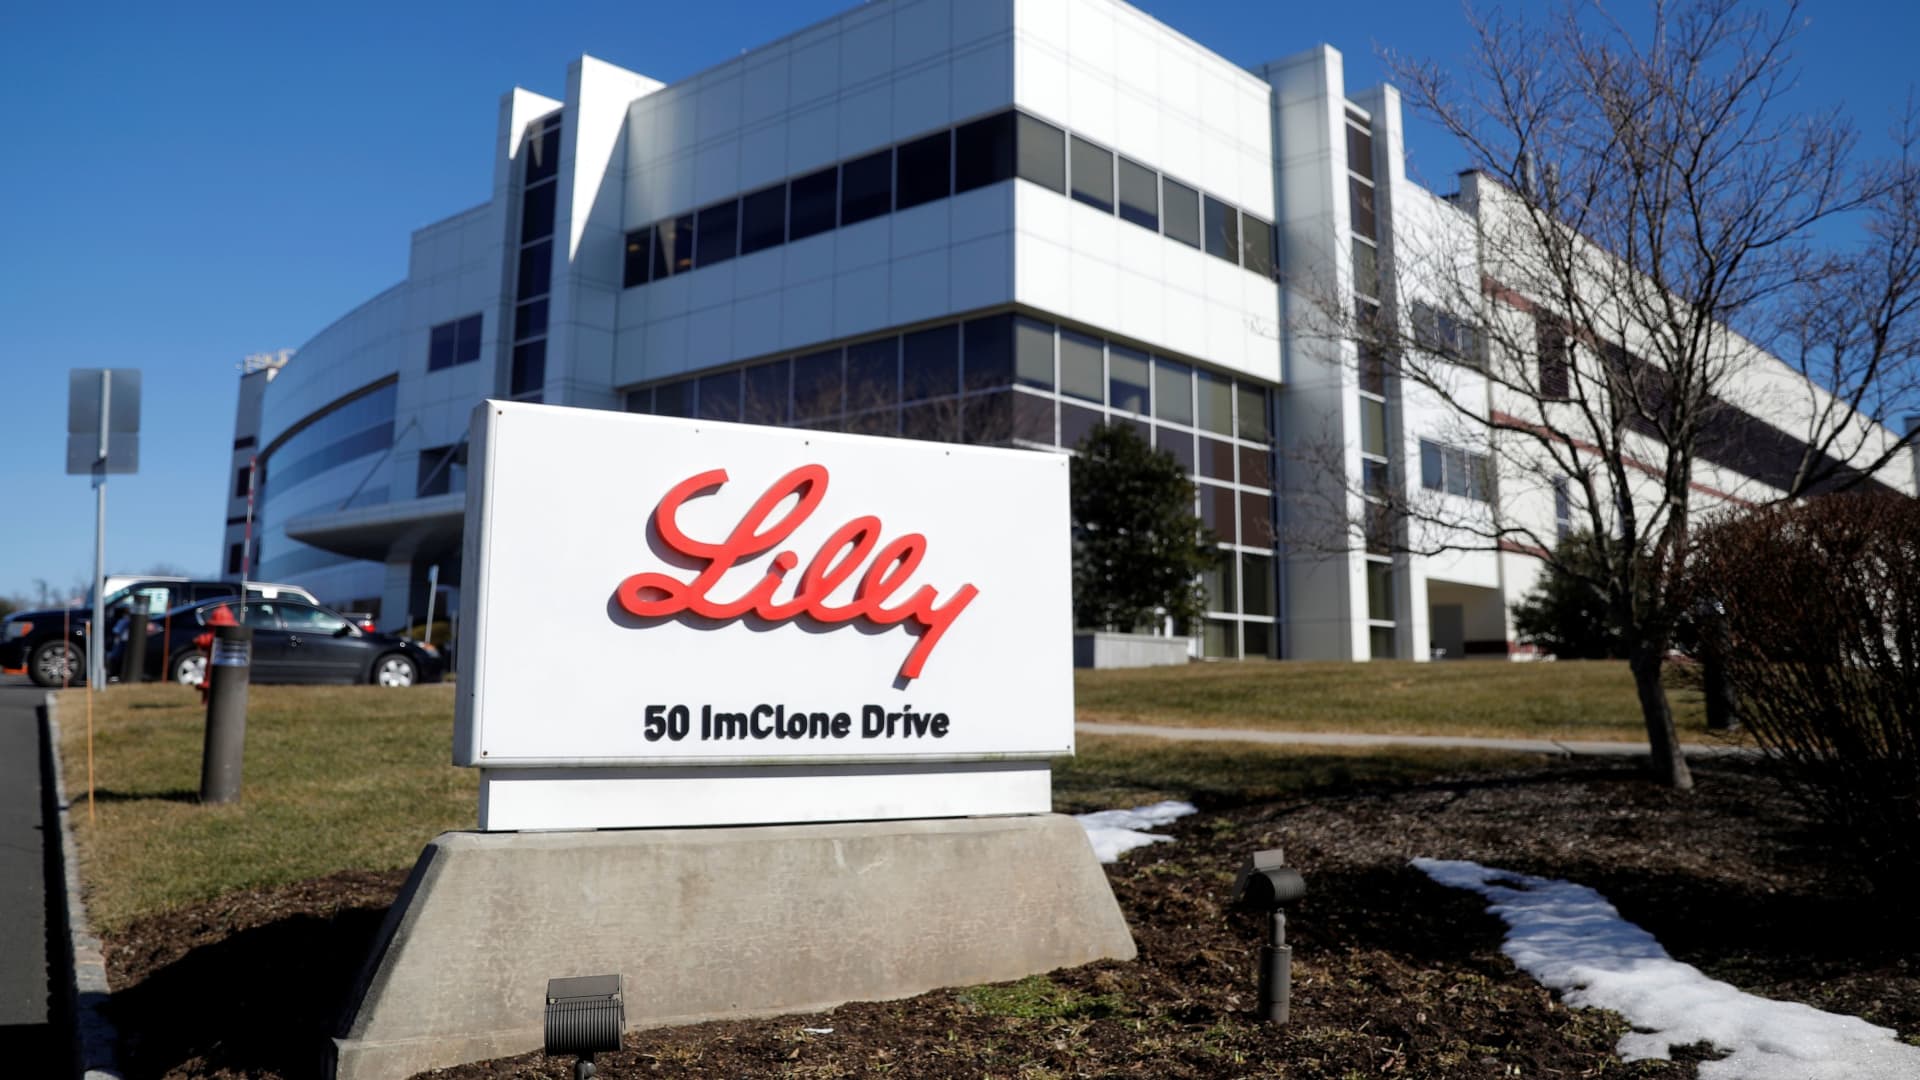 Uninsured Americans pay high costs for an insulin Eli Lilly vowed to price at , Sen. Warren says